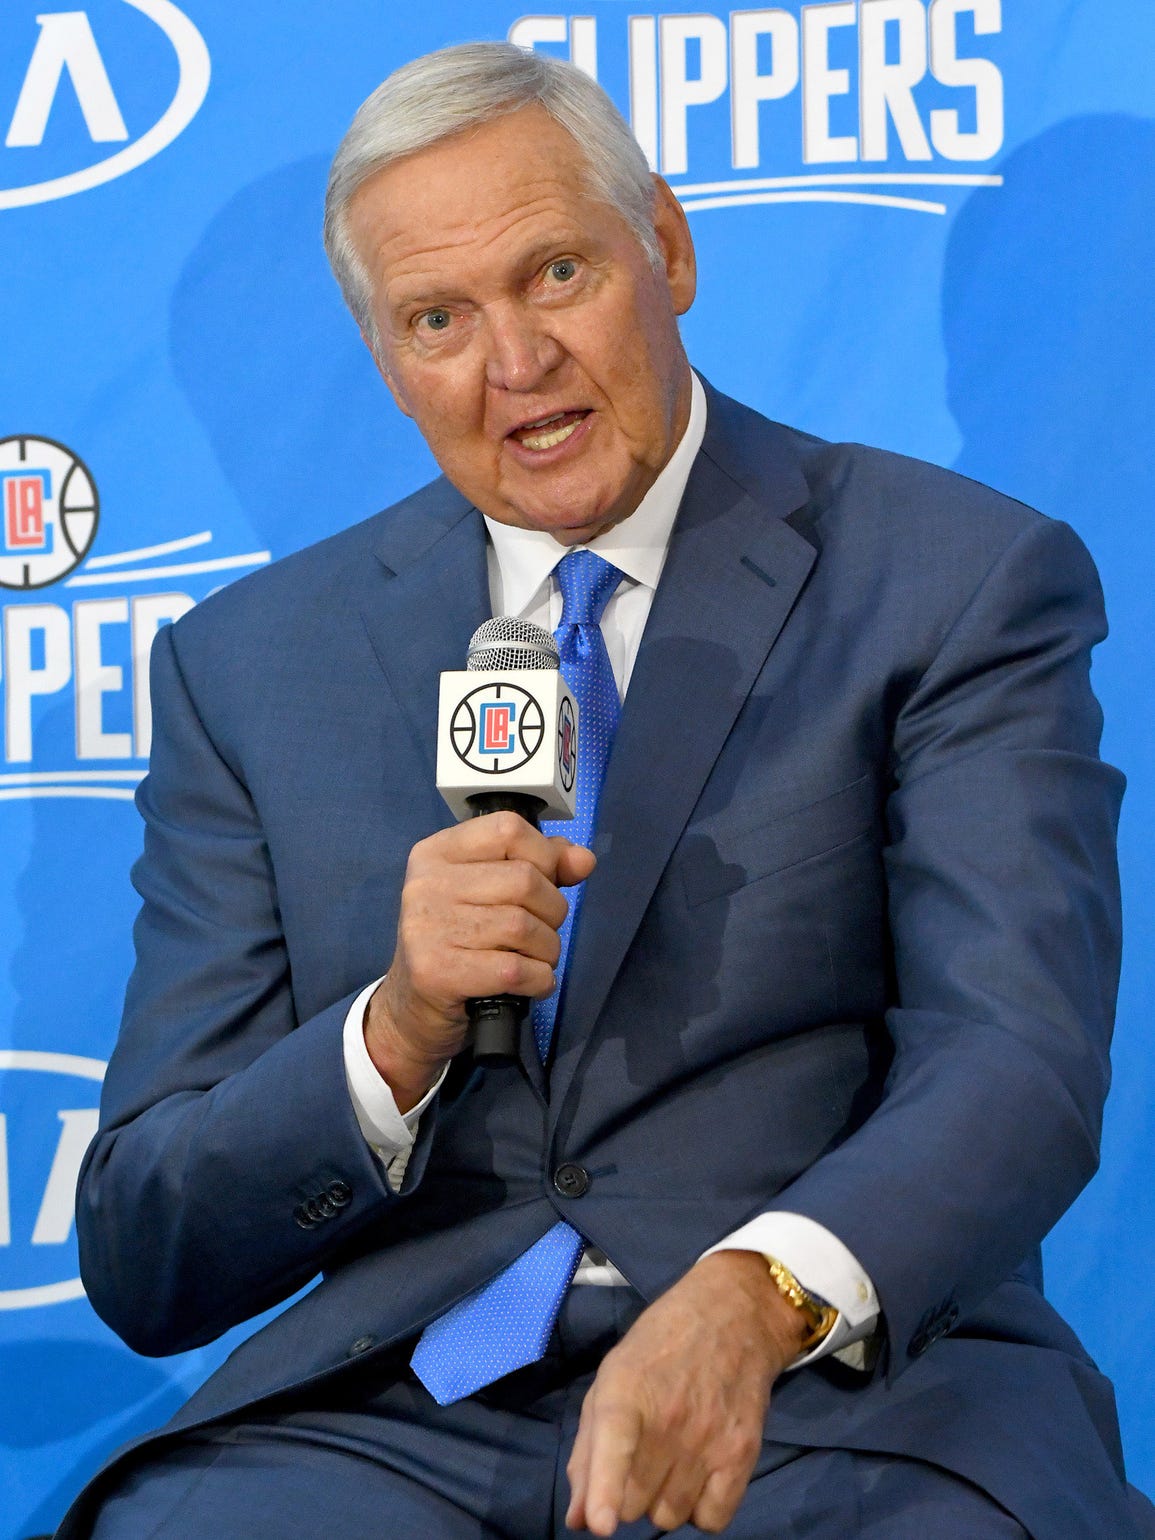 Hall of Famer Jerry West, a highly-successful executive